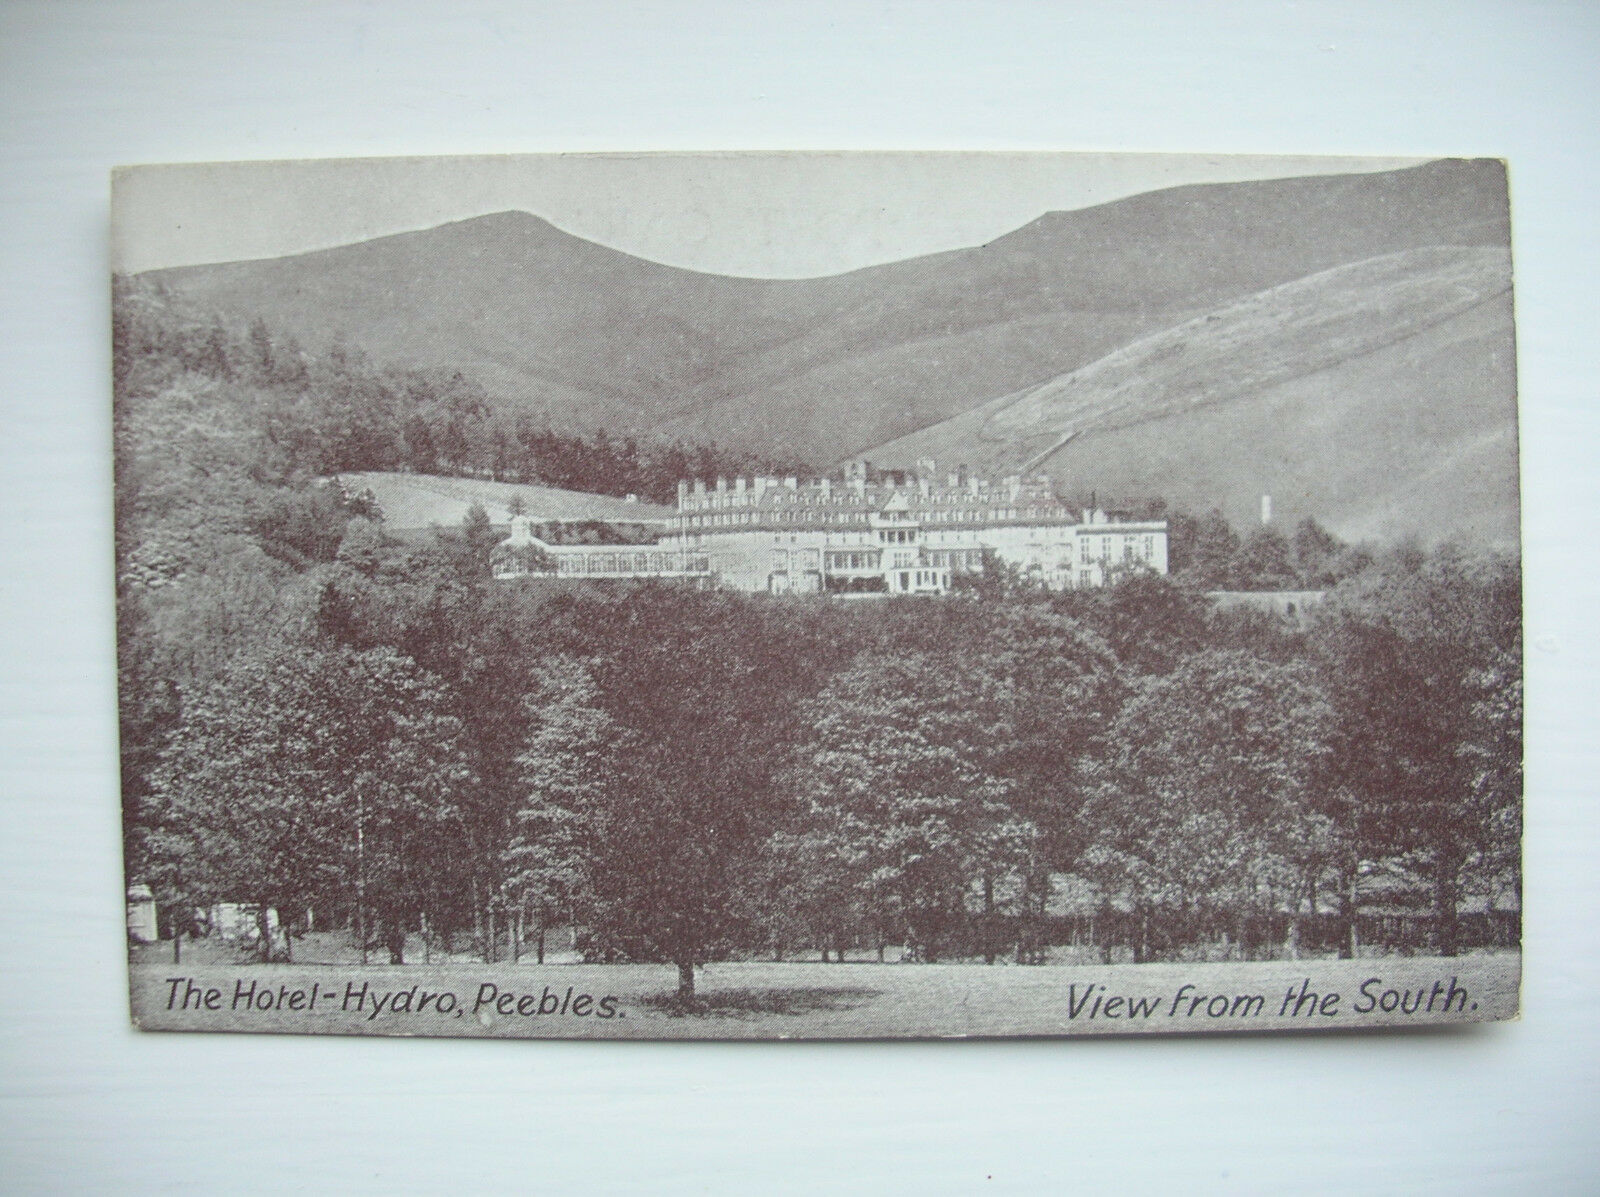 House Clearance - Peebles - The Hotel-Hydro.    (Very early 1900s)